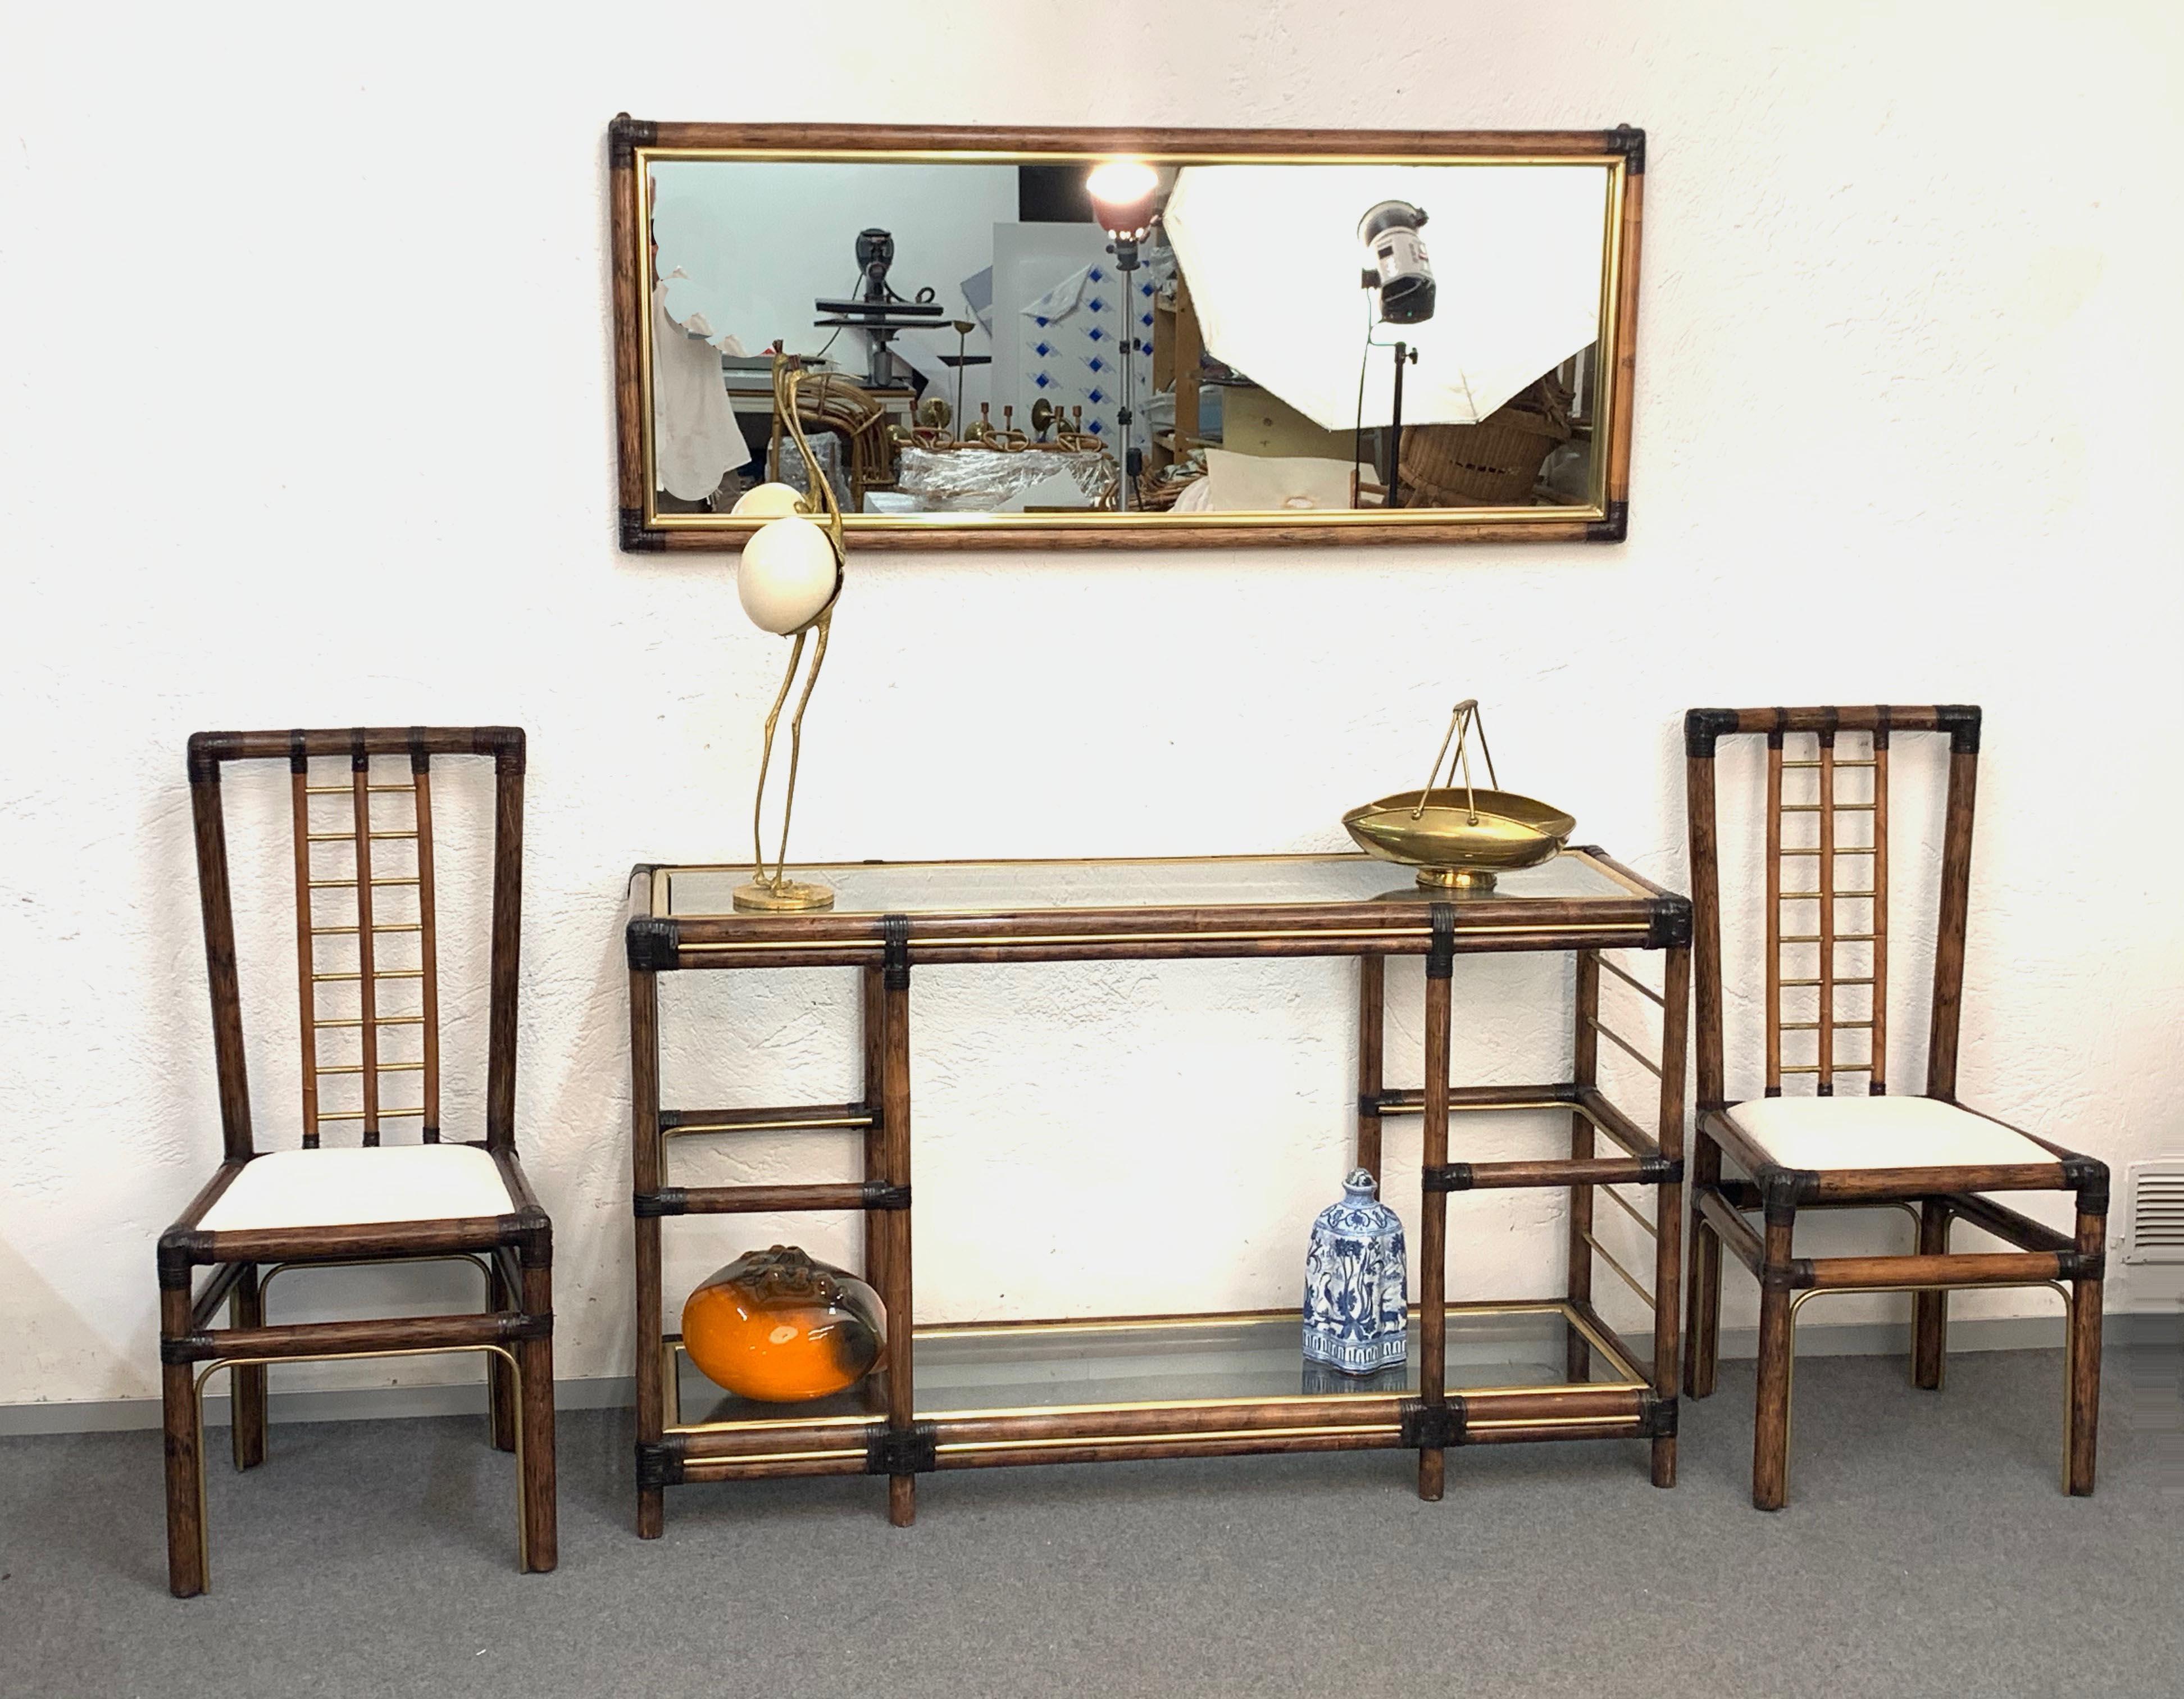 Midcentury Bamboo and Brass Console Table, Wall Mirror and Chairs, Italy, 1980s (Italienisch)